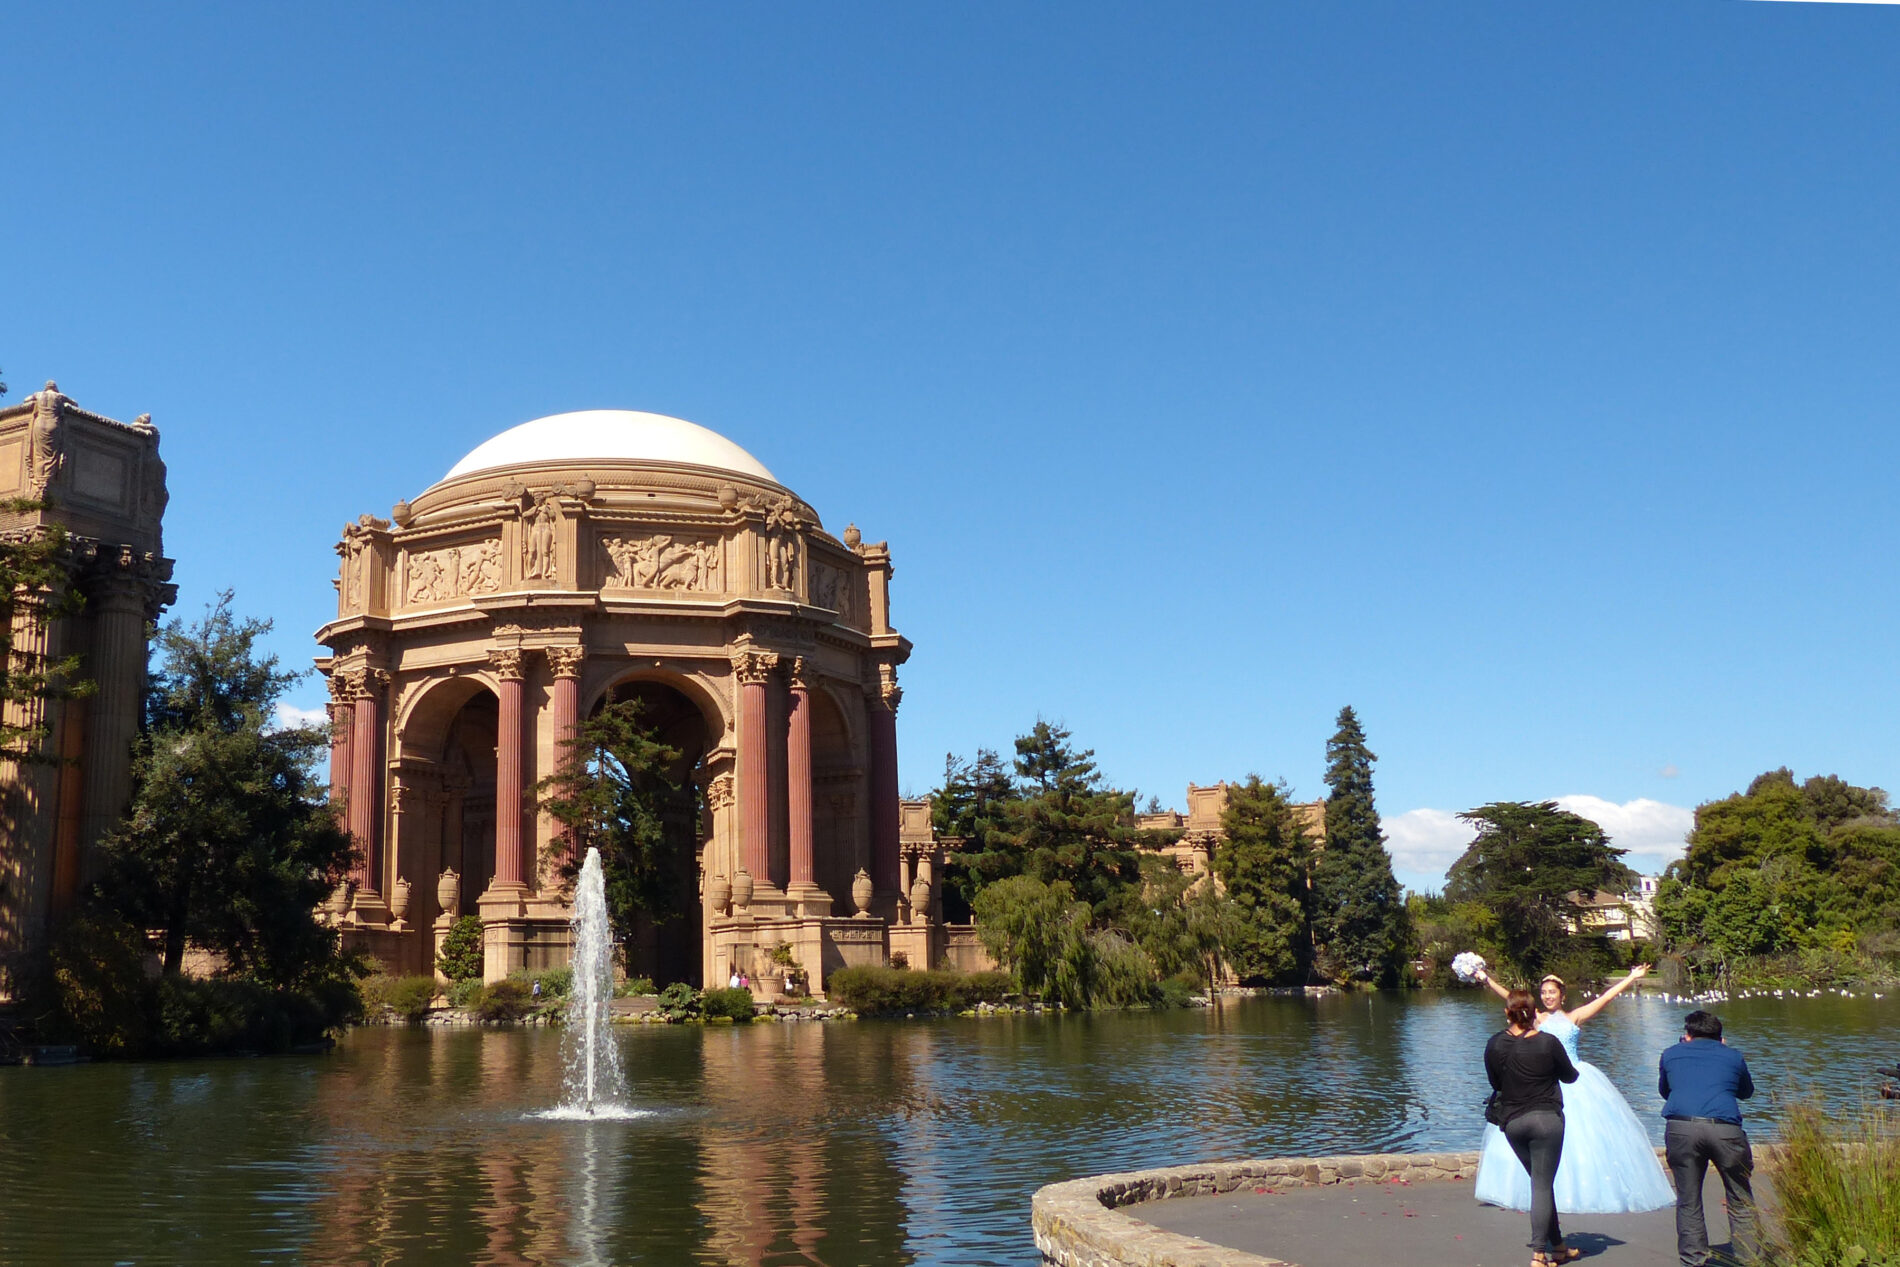 The San Francisco Palace of Fine Arts. It’s a faux Roman ruin built for the 1915 World’s Fair, and it’s a great photo op.